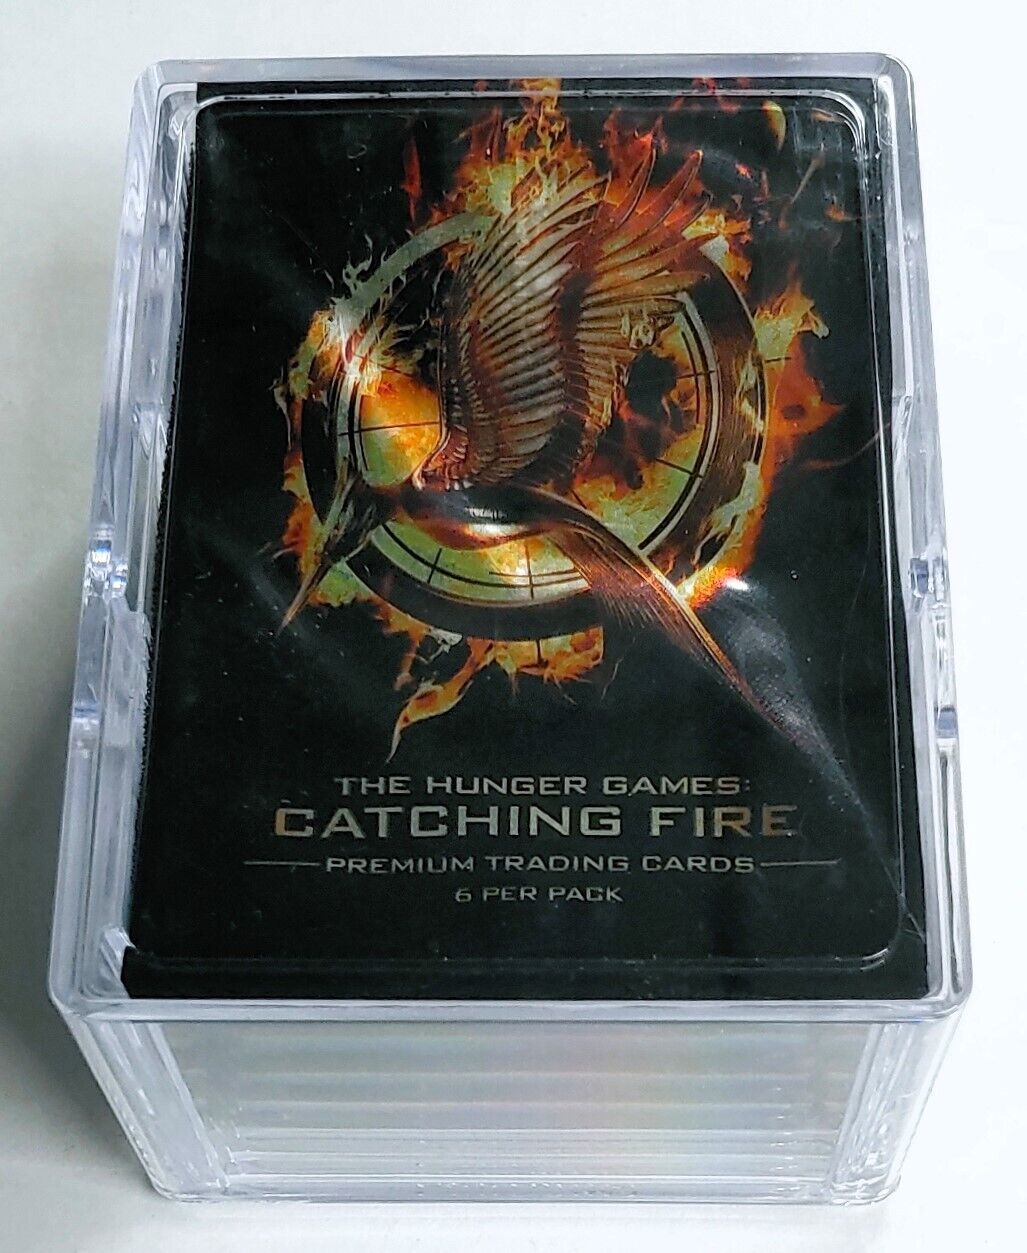 THE HUNGER GAMES: CATCHING FIRE MOVIE 2013 NECA CARD SET 1-40 W/WRAPPER & CASE